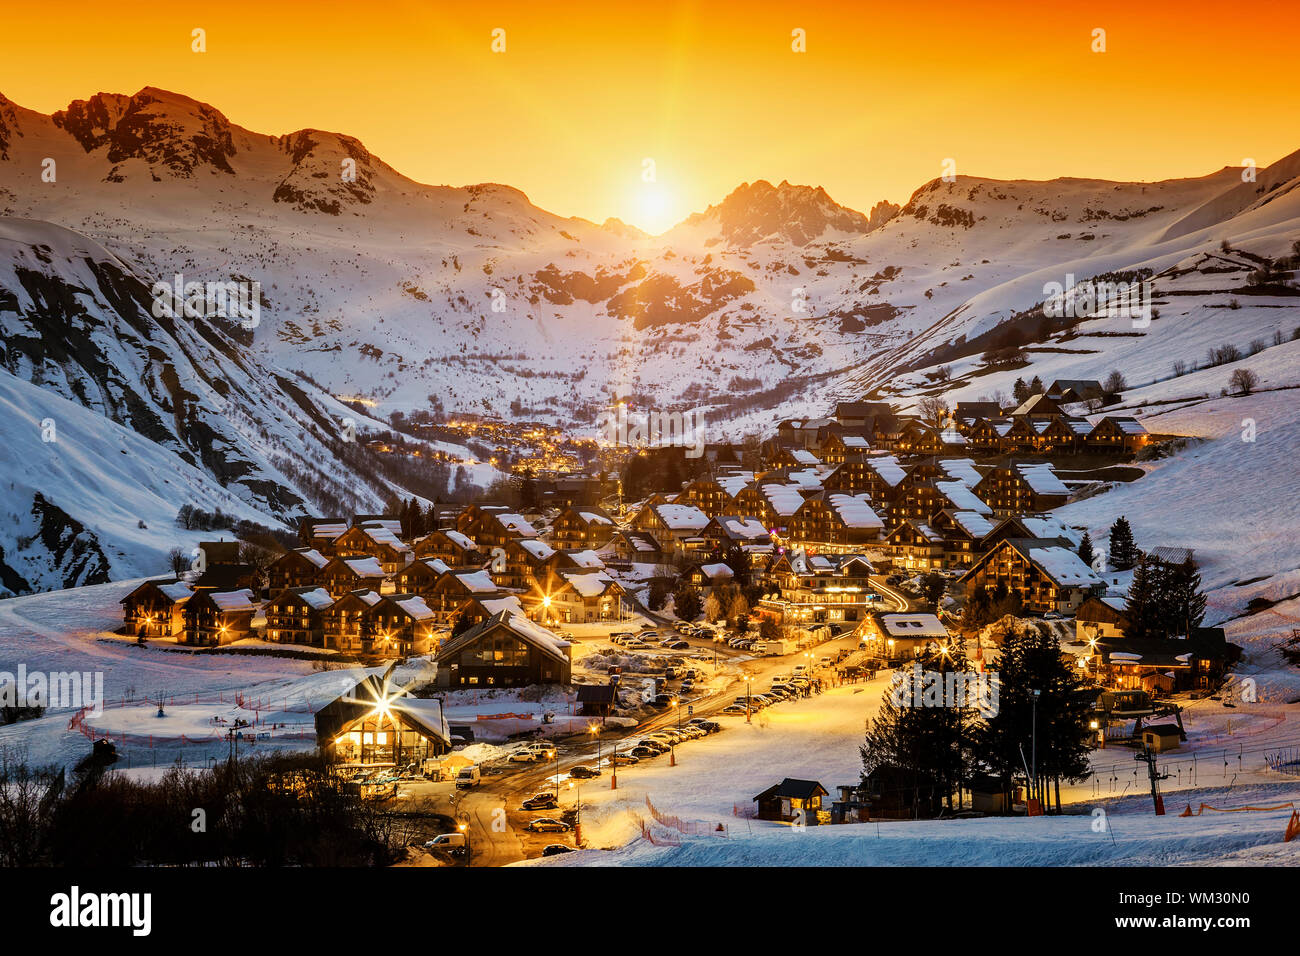 View of Saint Jean d'Arves village by night in winter, France Stock Photo -  Alamy